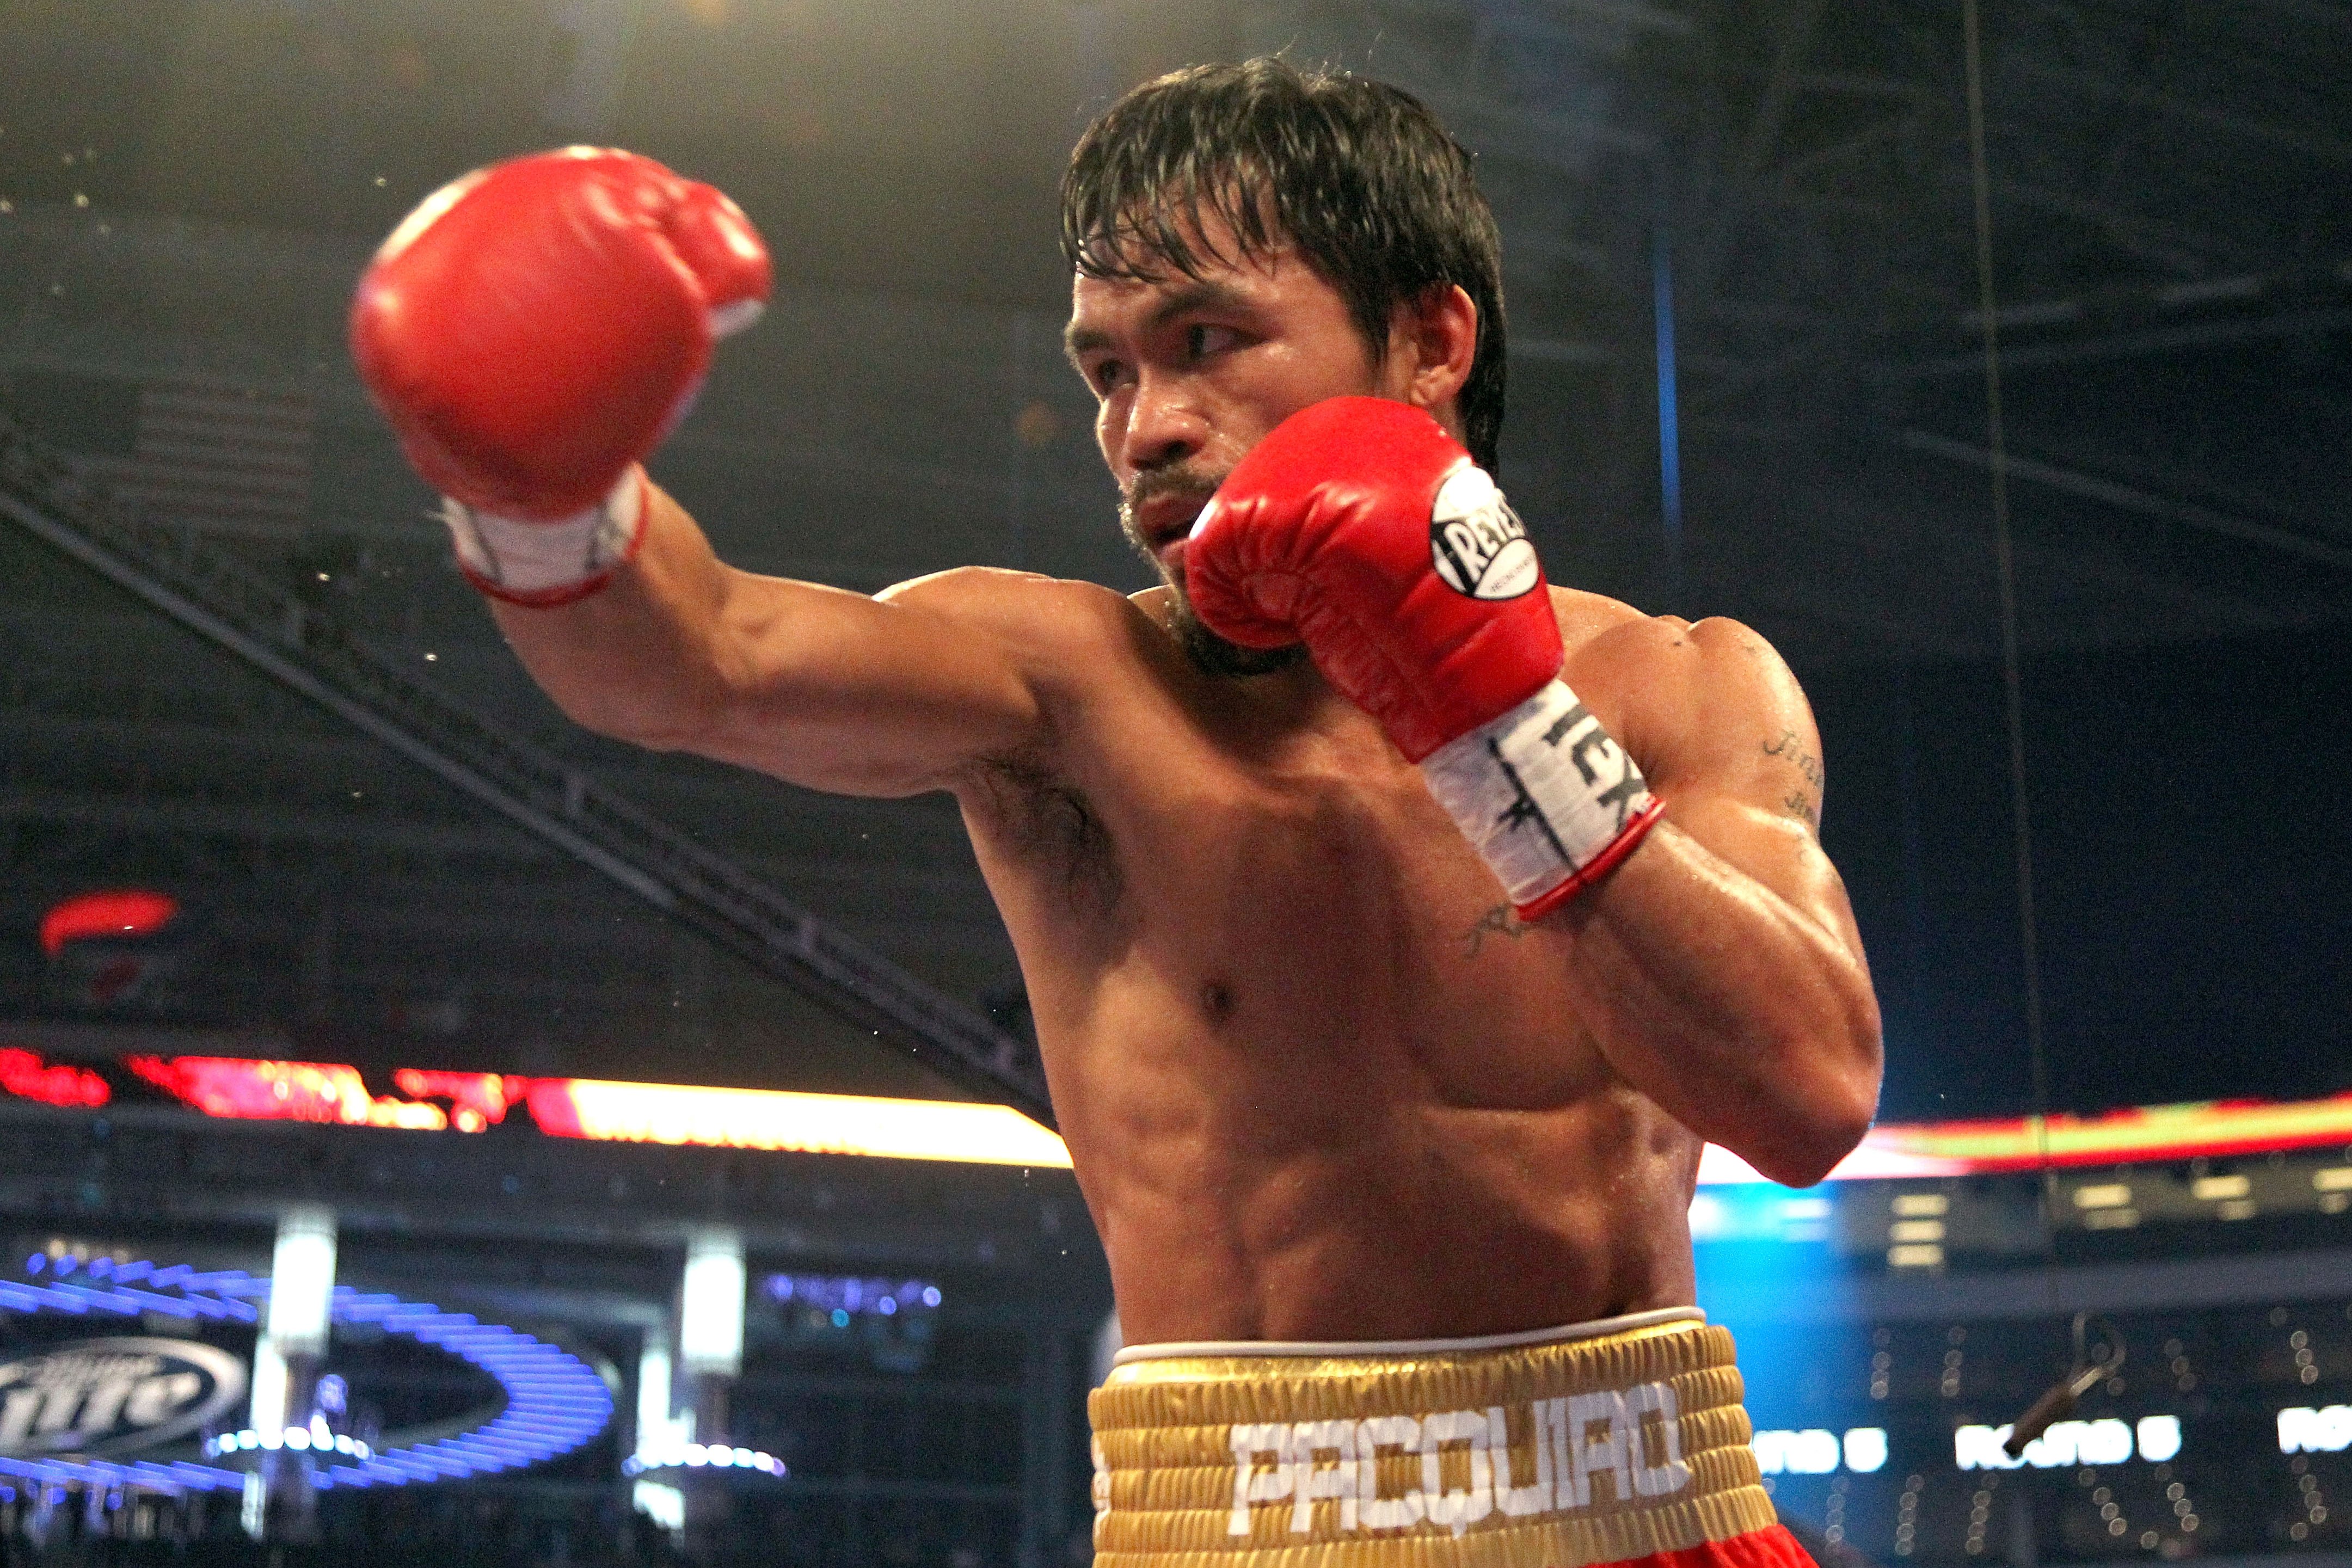 ARLINGTON, TX - MARCH 13:  Manny Pacquiao of the Philippines throws a punch in the ring against Joshua Clottey of Ghana during the WBO welterweight title fight at Cowboys Stadium on March 13, 2010 in Arlington, Texas. Pacquiao defeated Clottey by unanimou